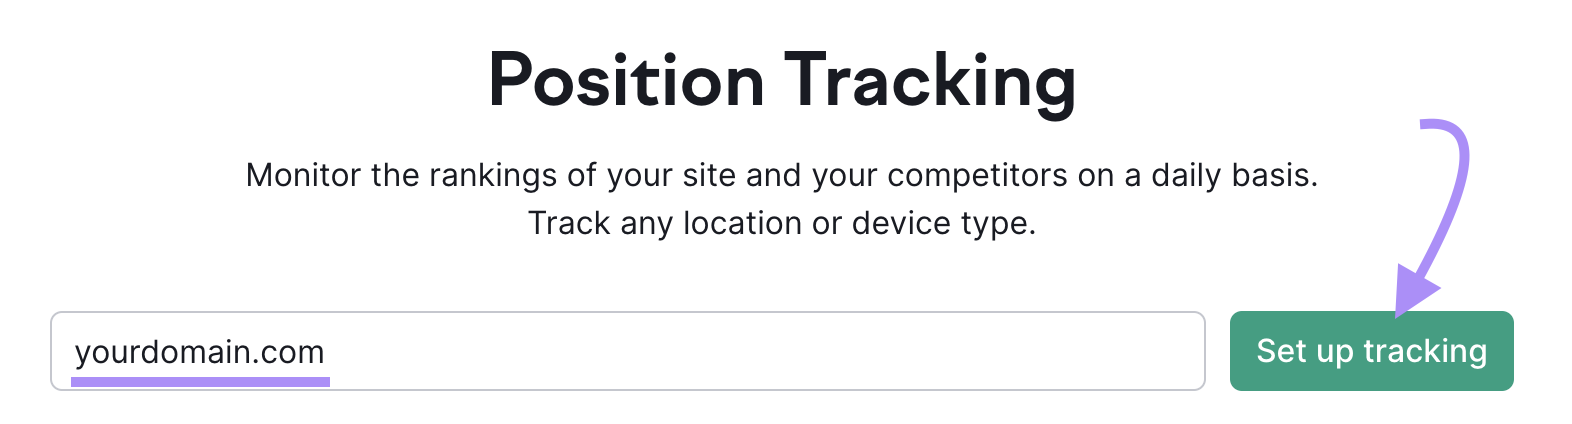 Position Tracking search bar